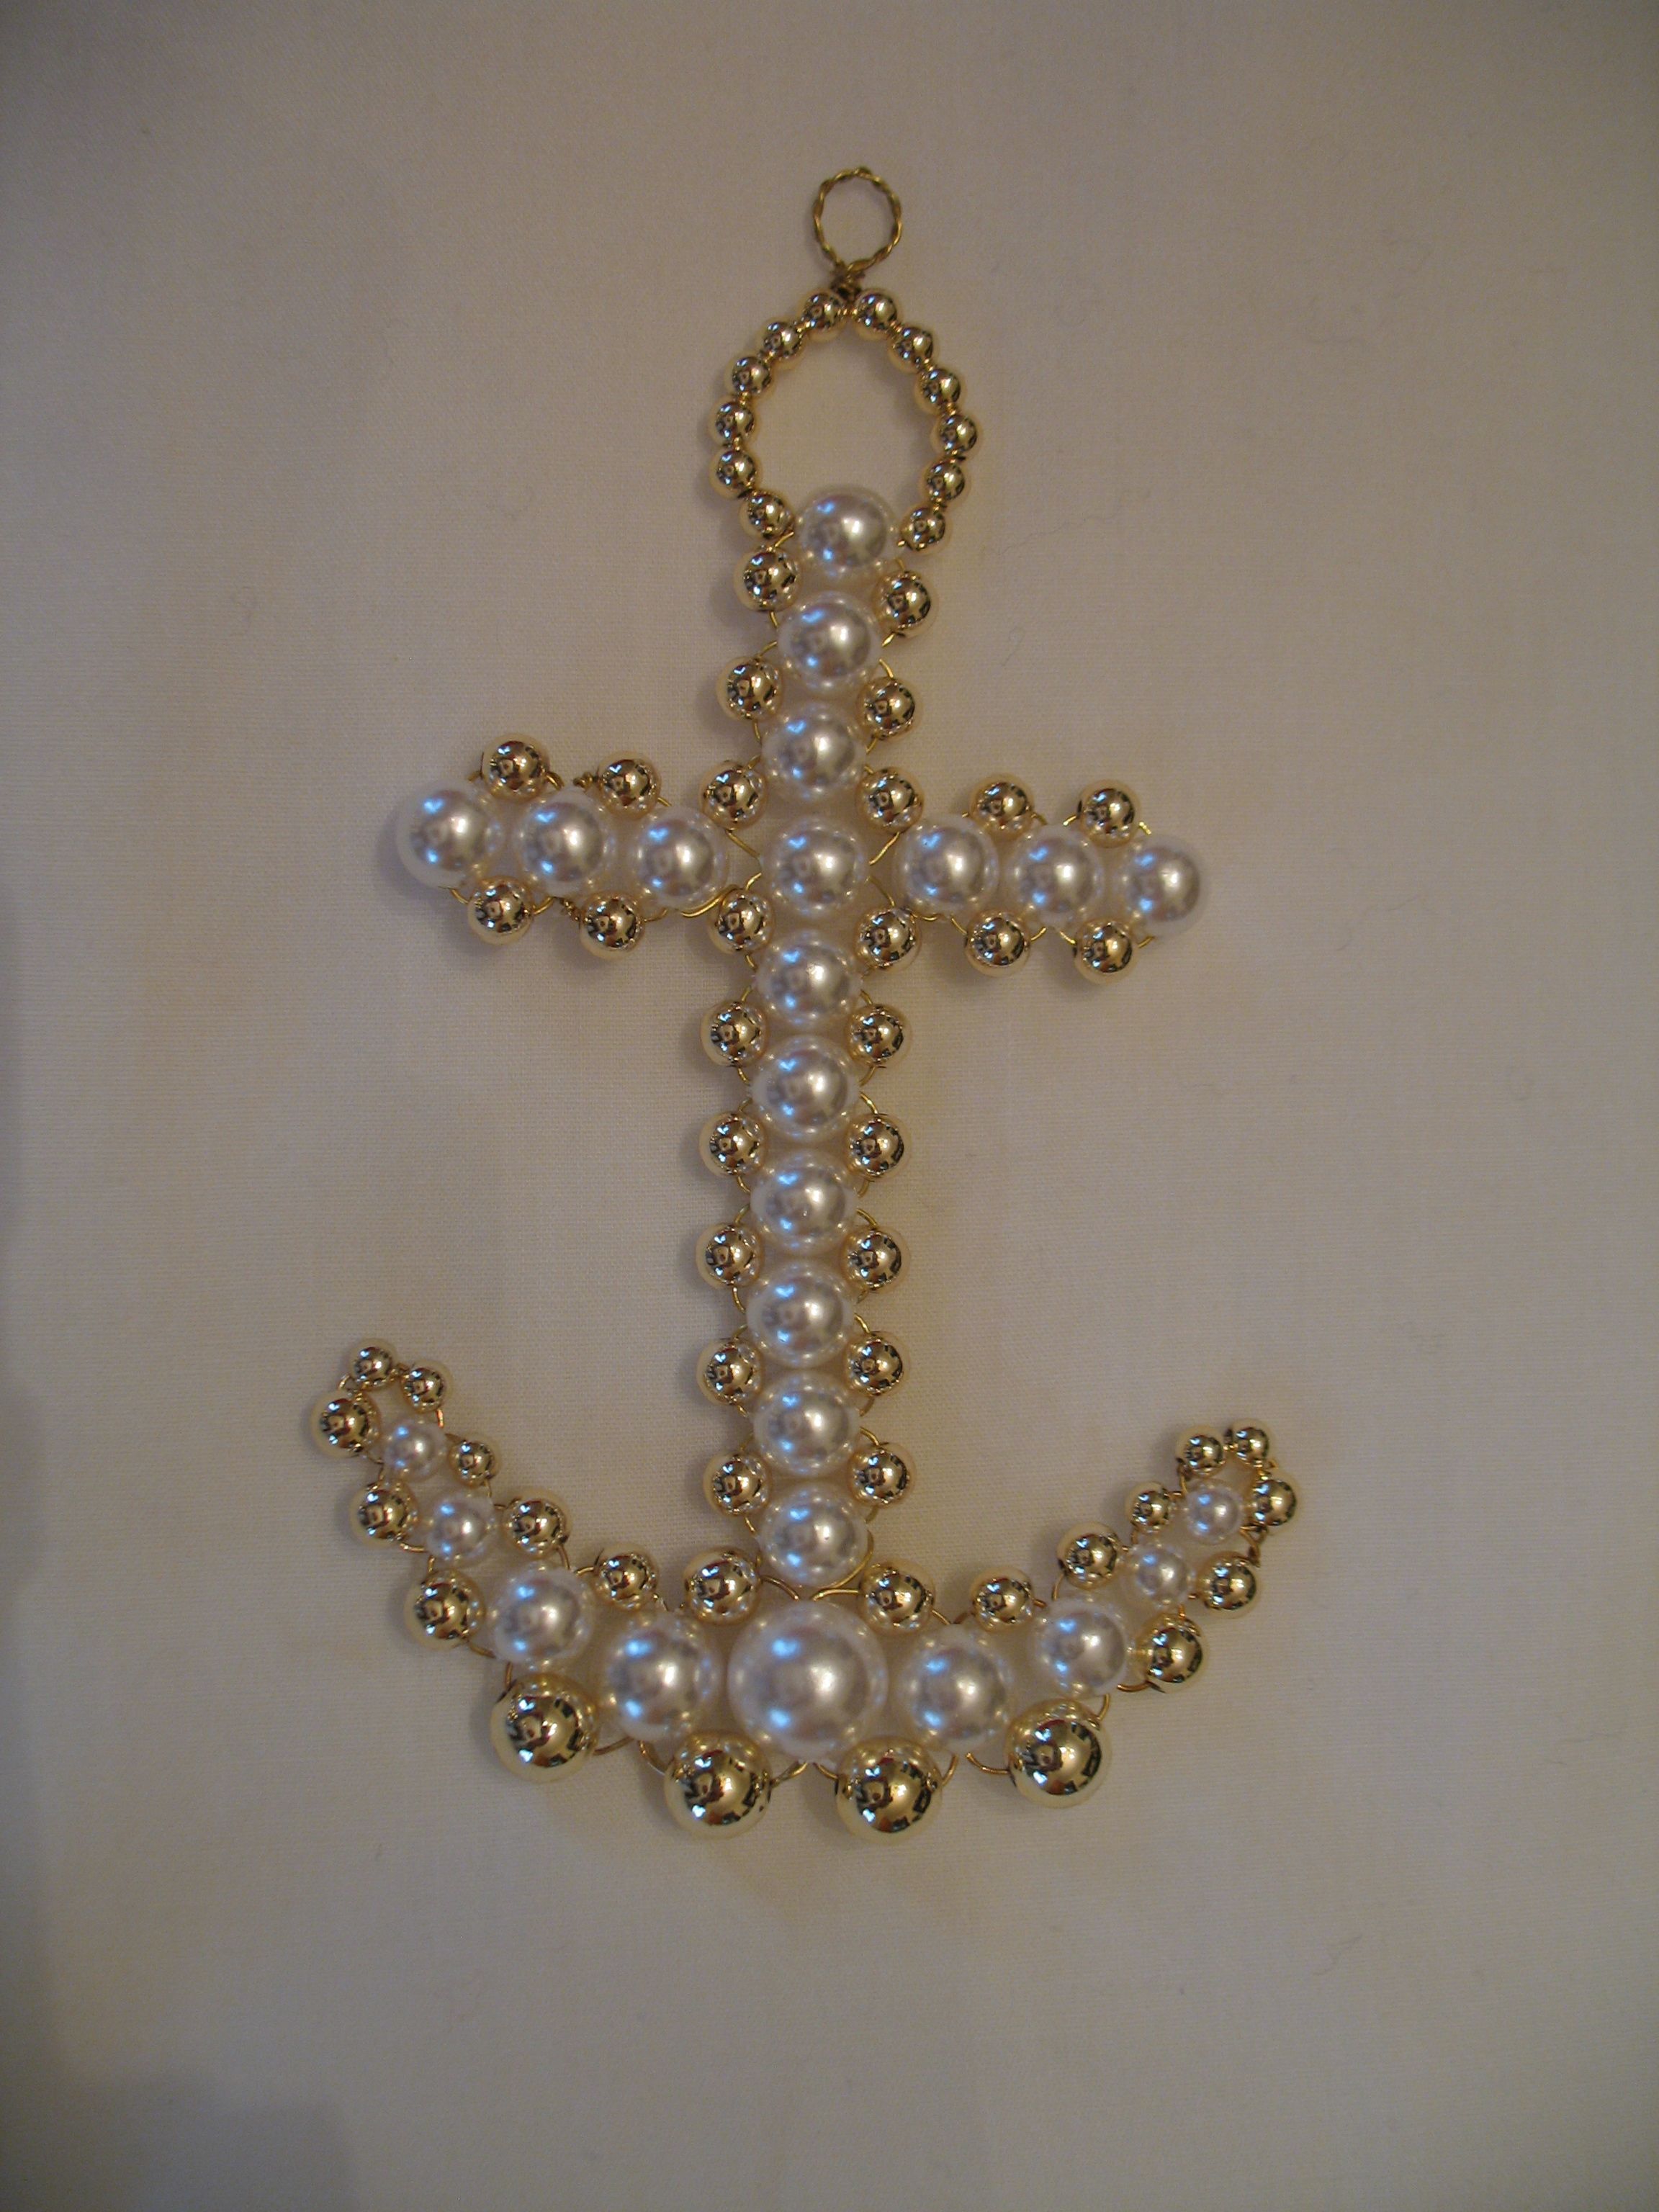 beaded cross necklace craft instructions